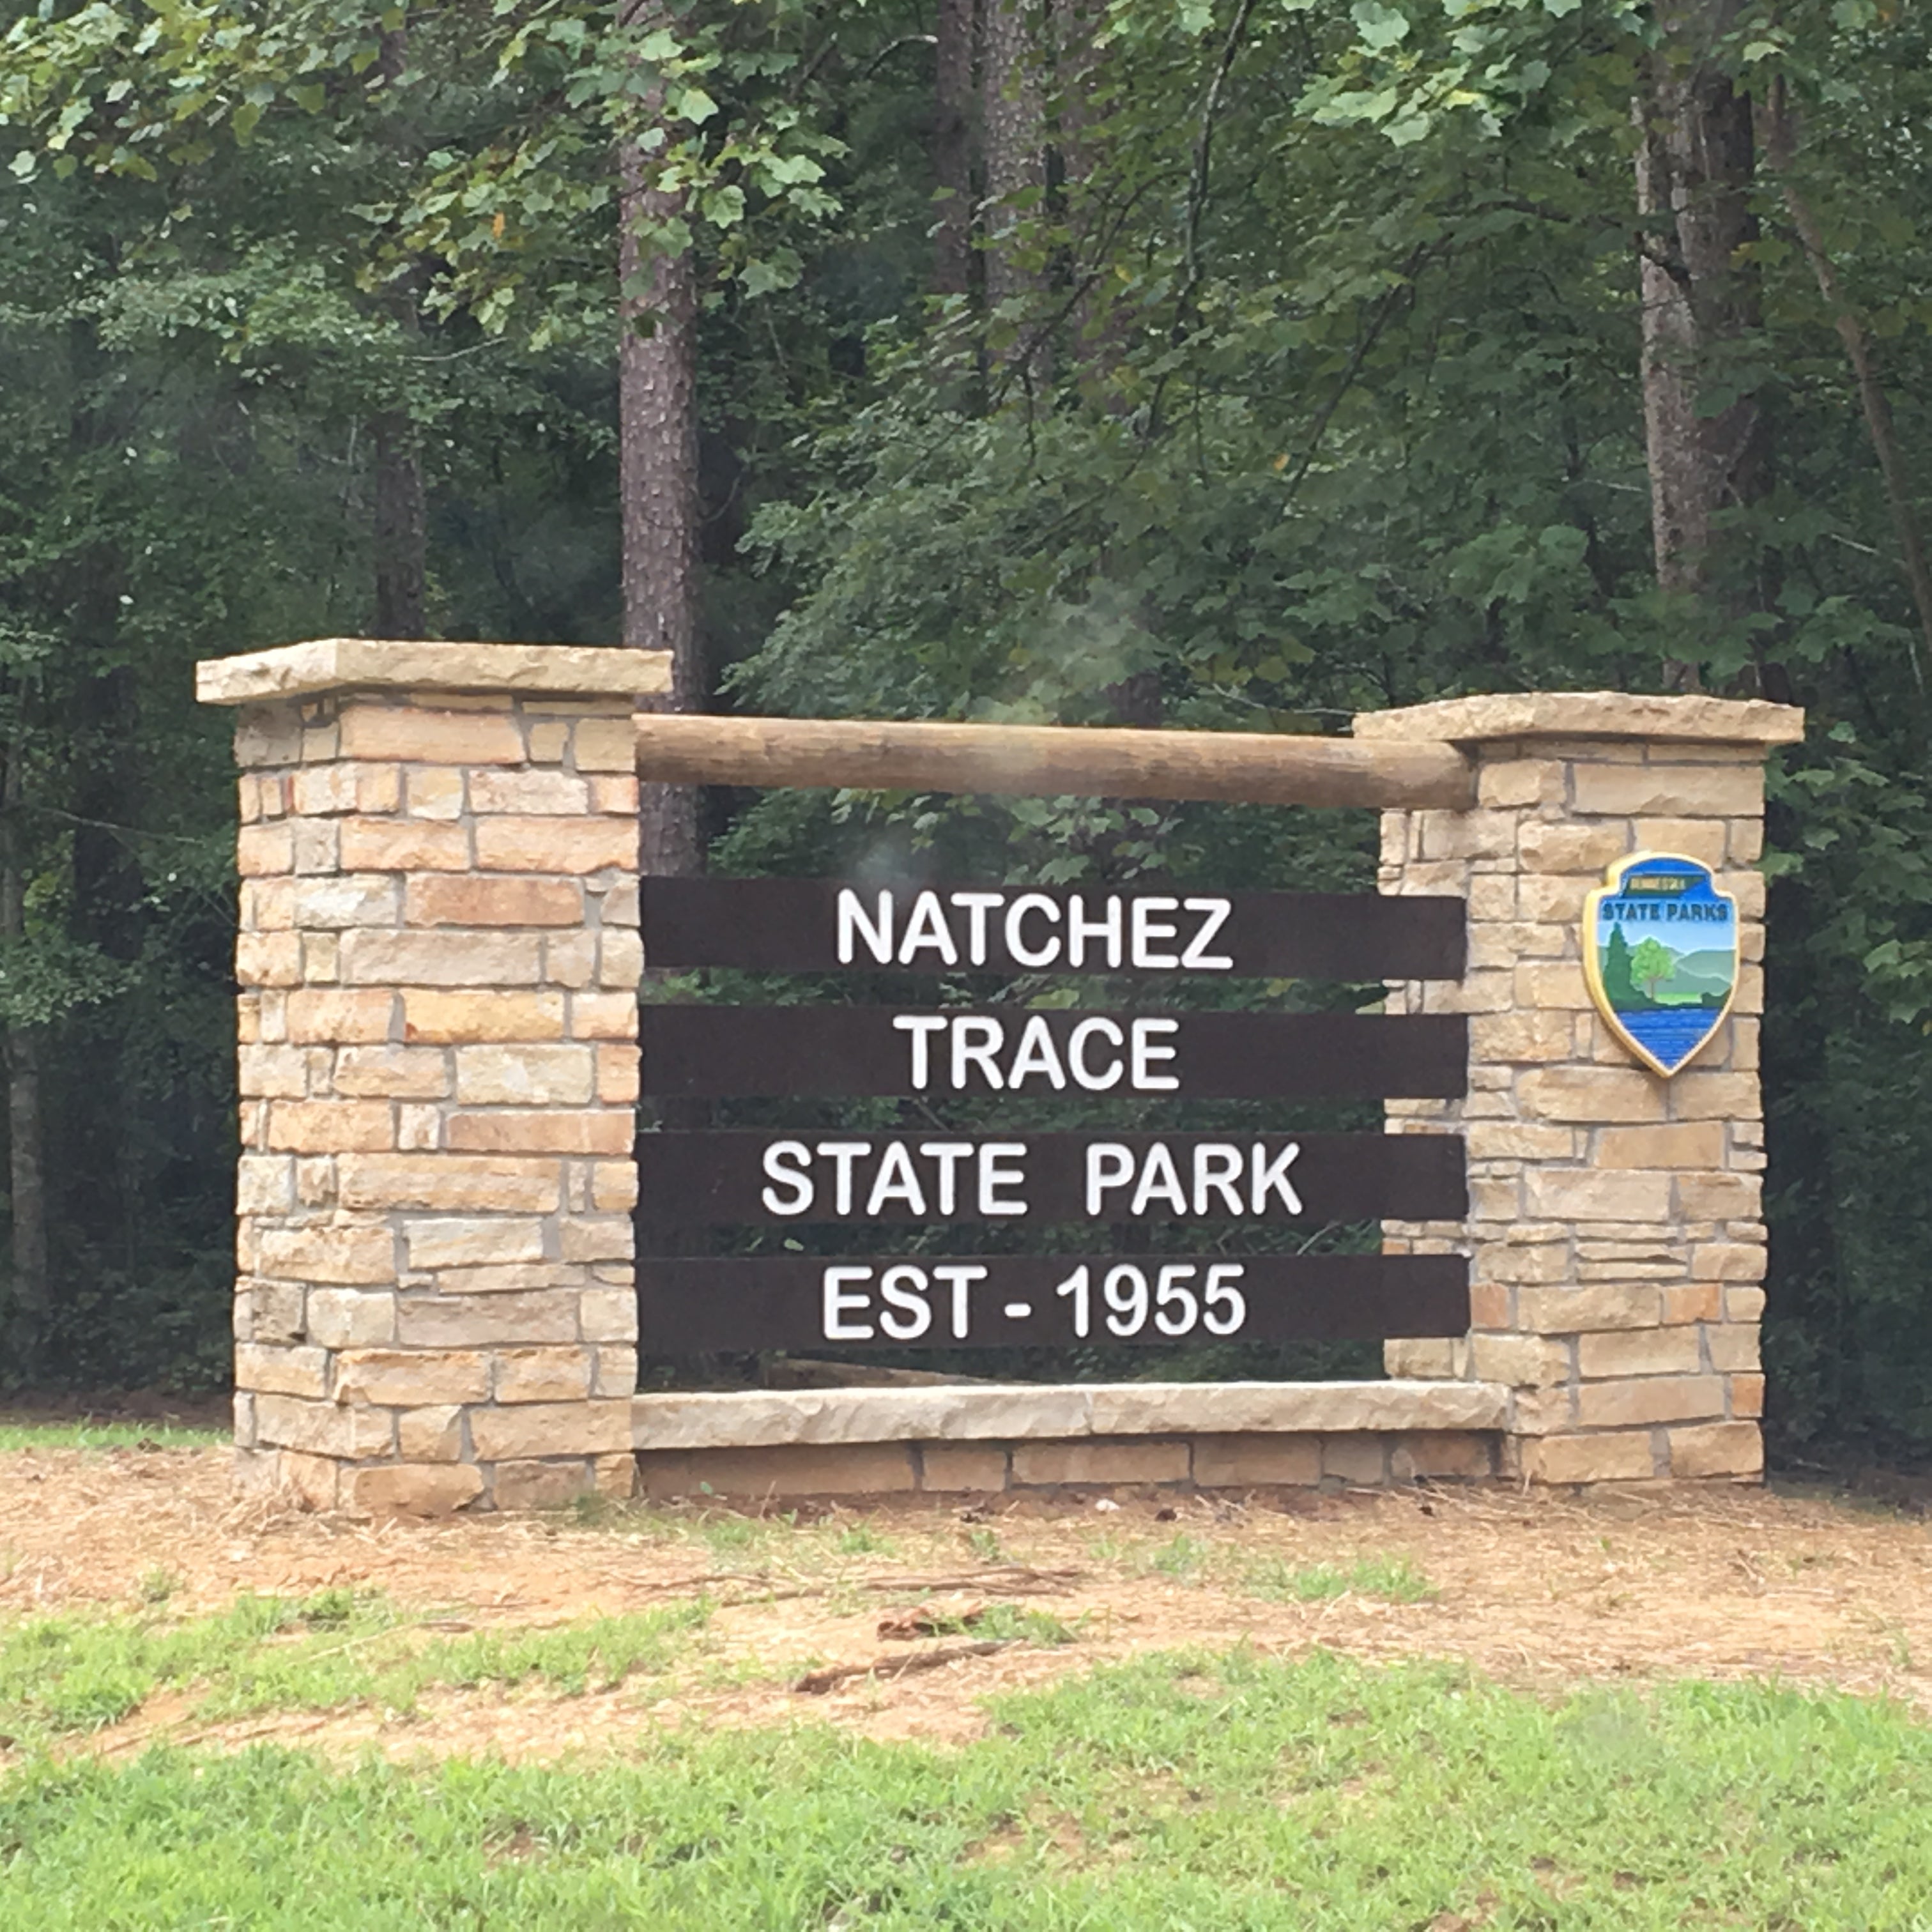 Camper submitted image from Cub Lake Campground #1 — Natchez Trace State Park - 1